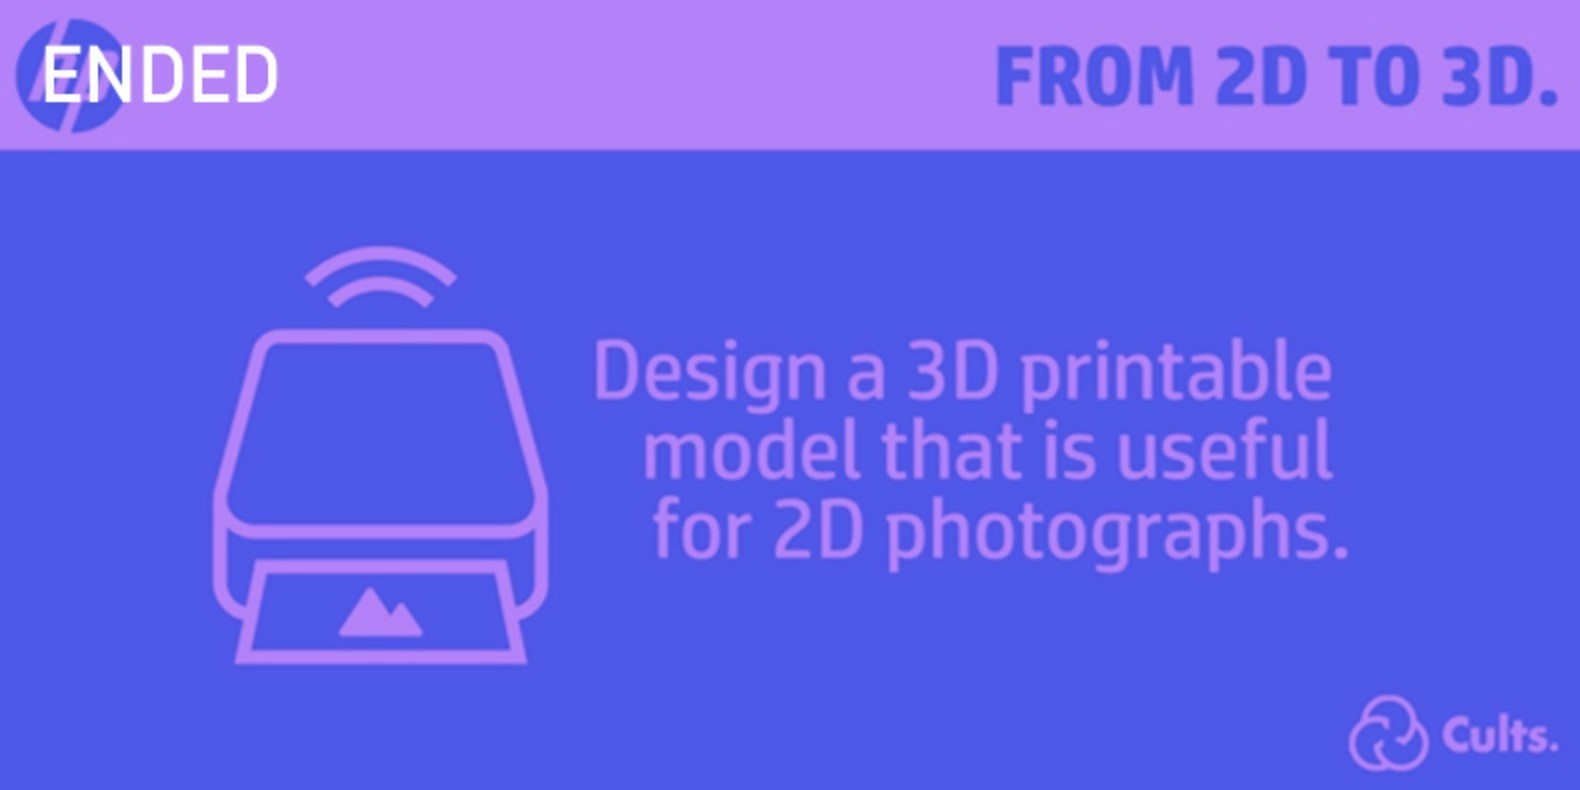 The design and 3D printing challenge around photo and camera.